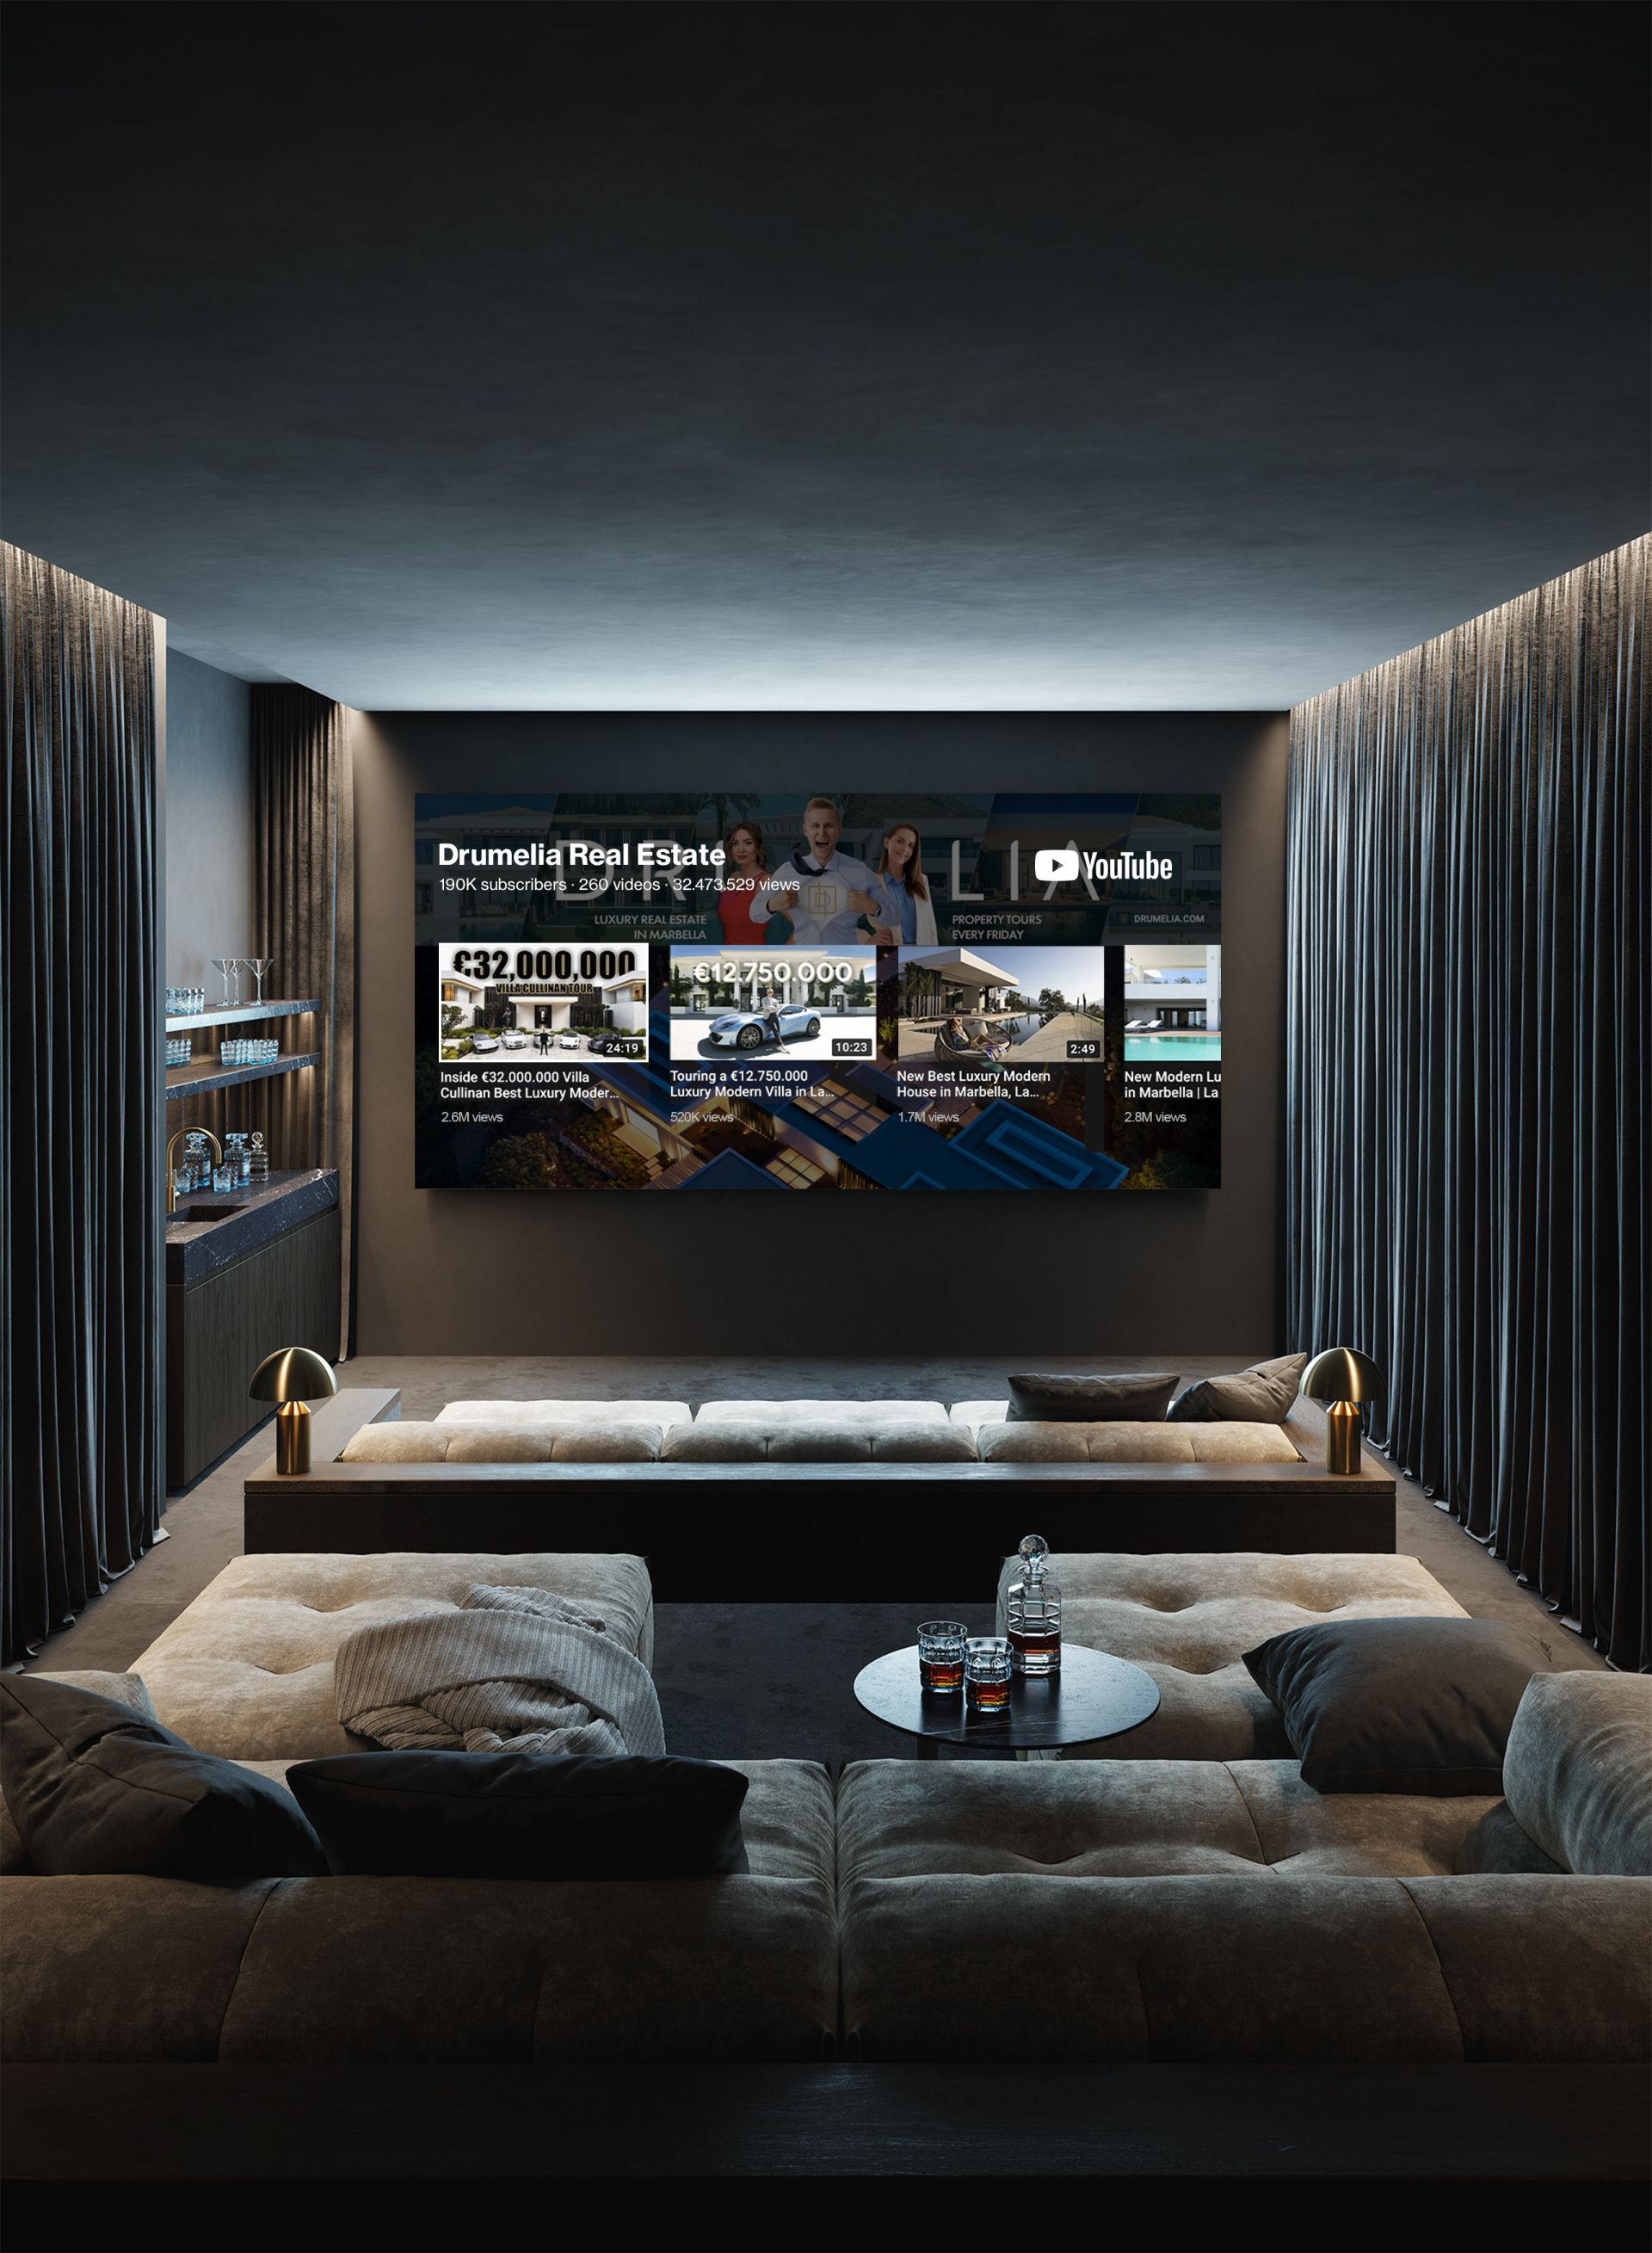 Photograph of a home cinema with Drumelia's YouTube Channel on screen